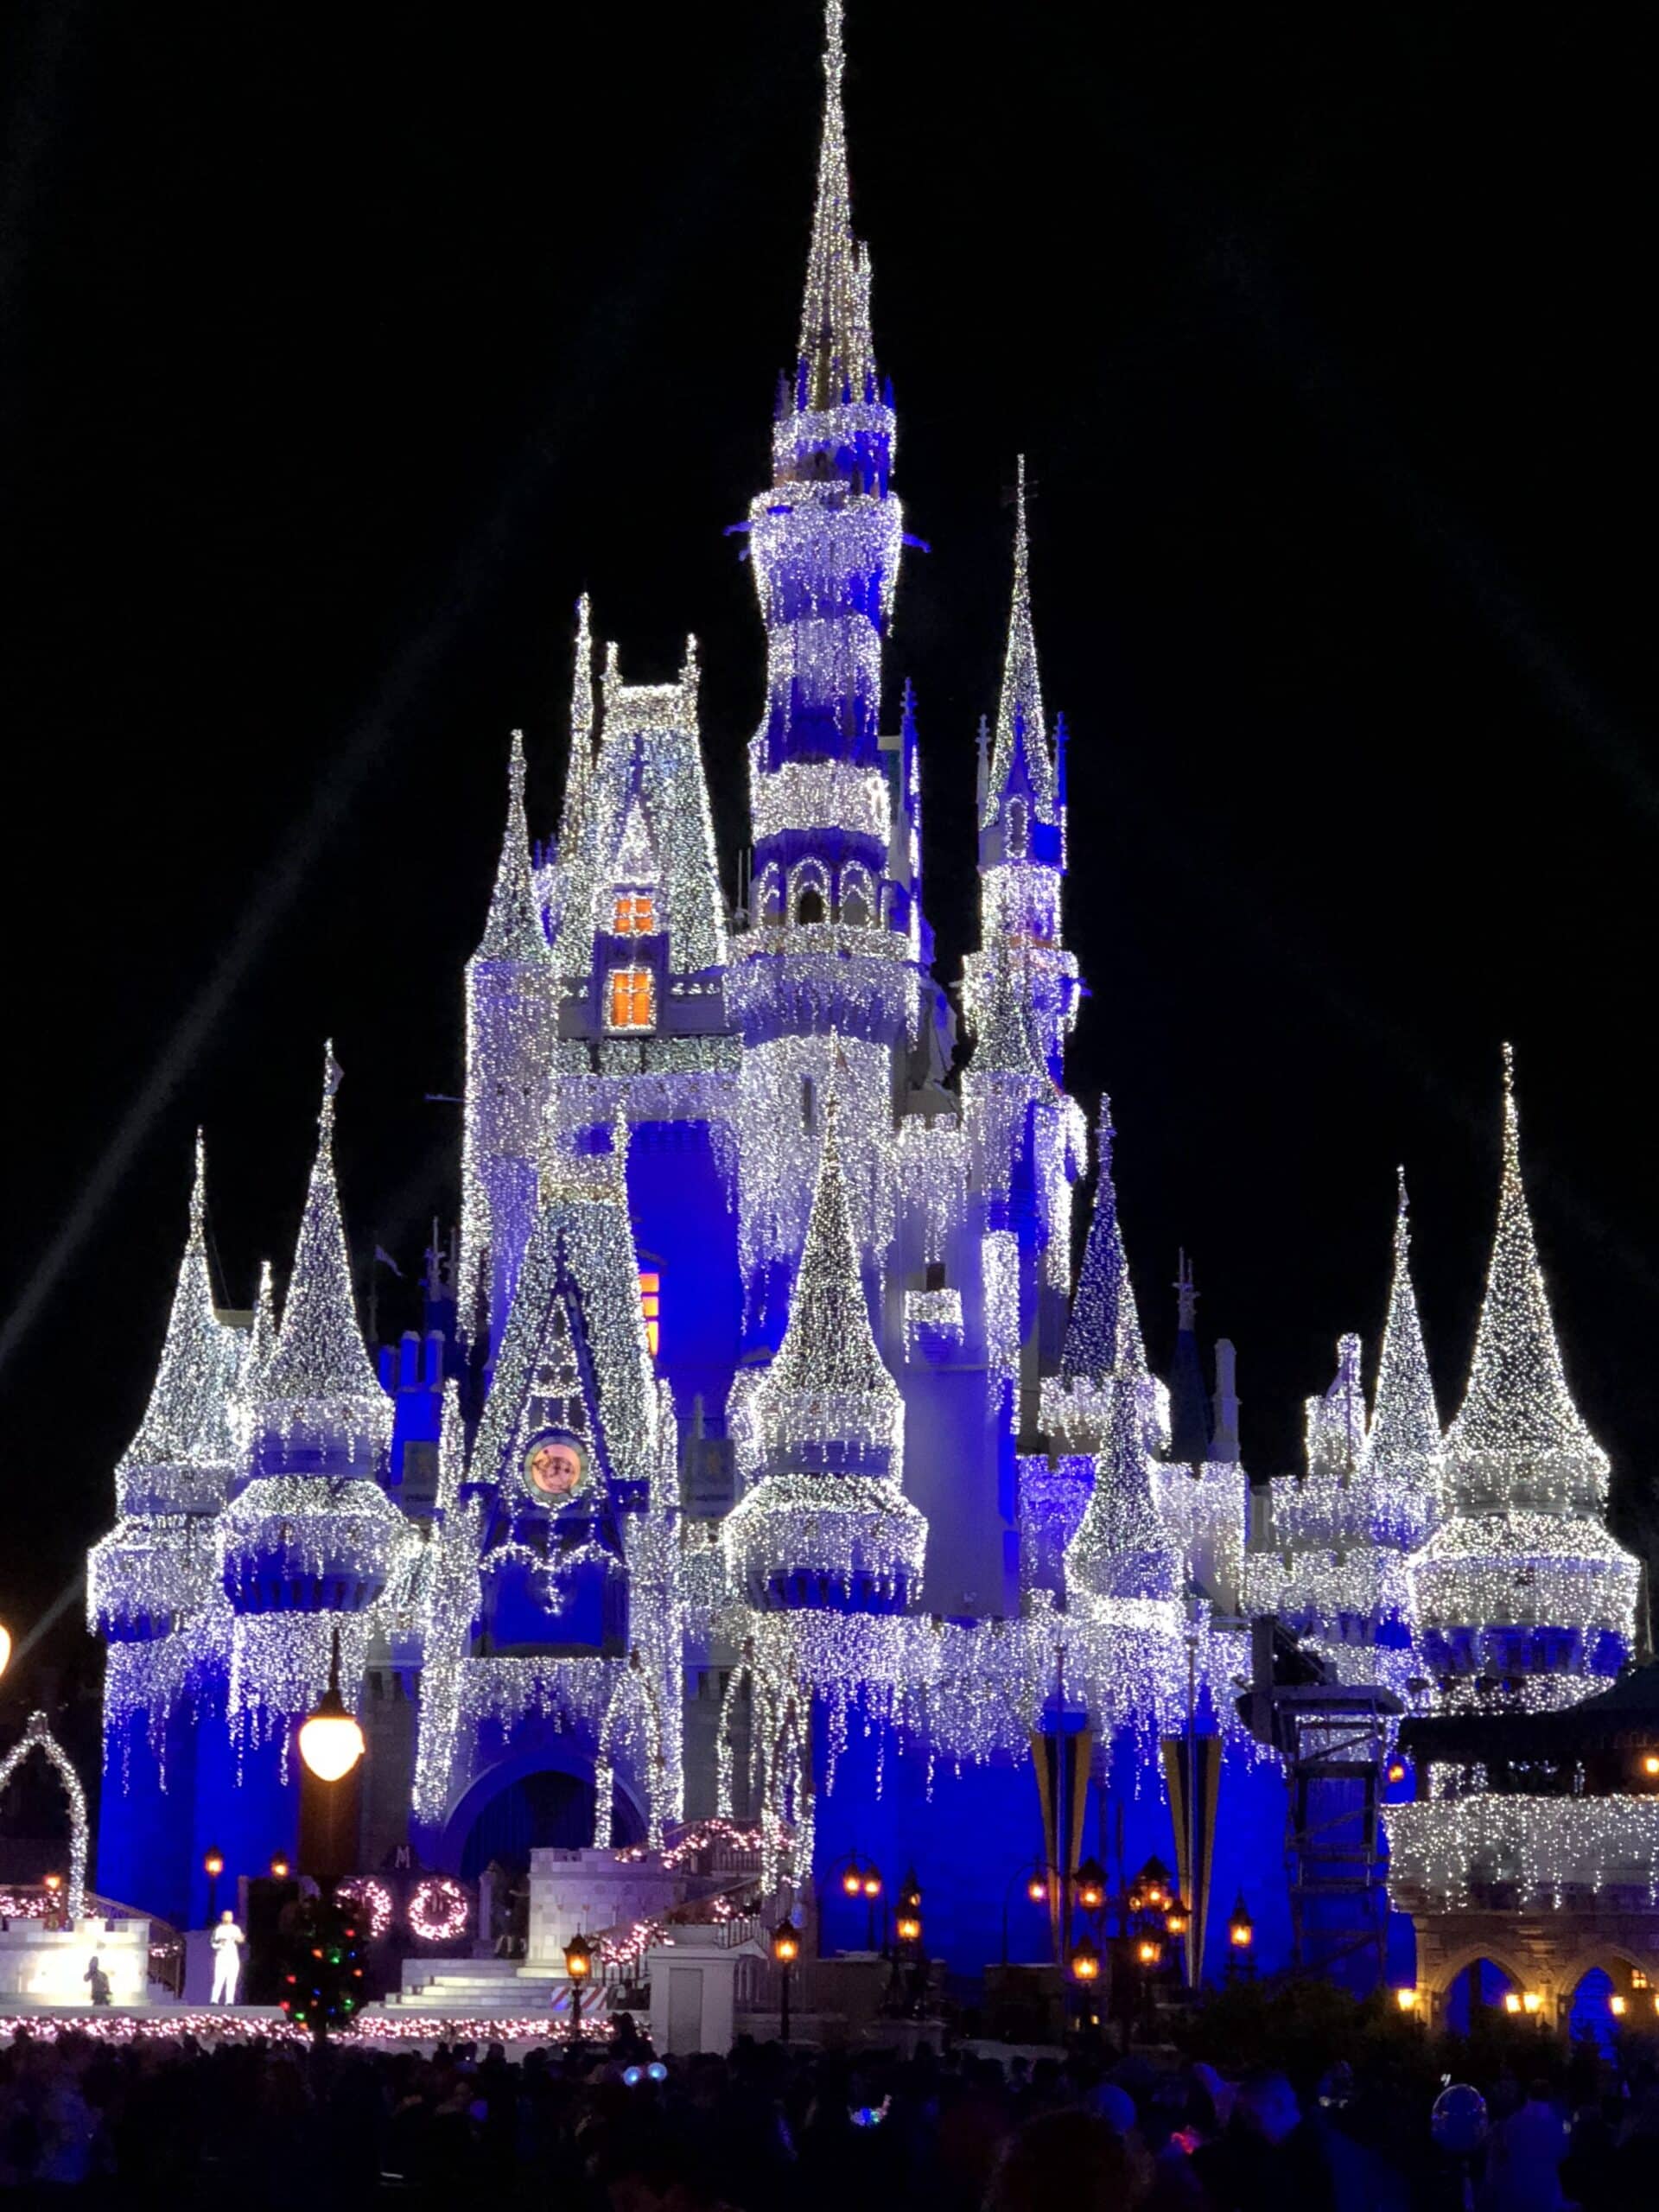 When Does Disney World Decorate For Christmas?